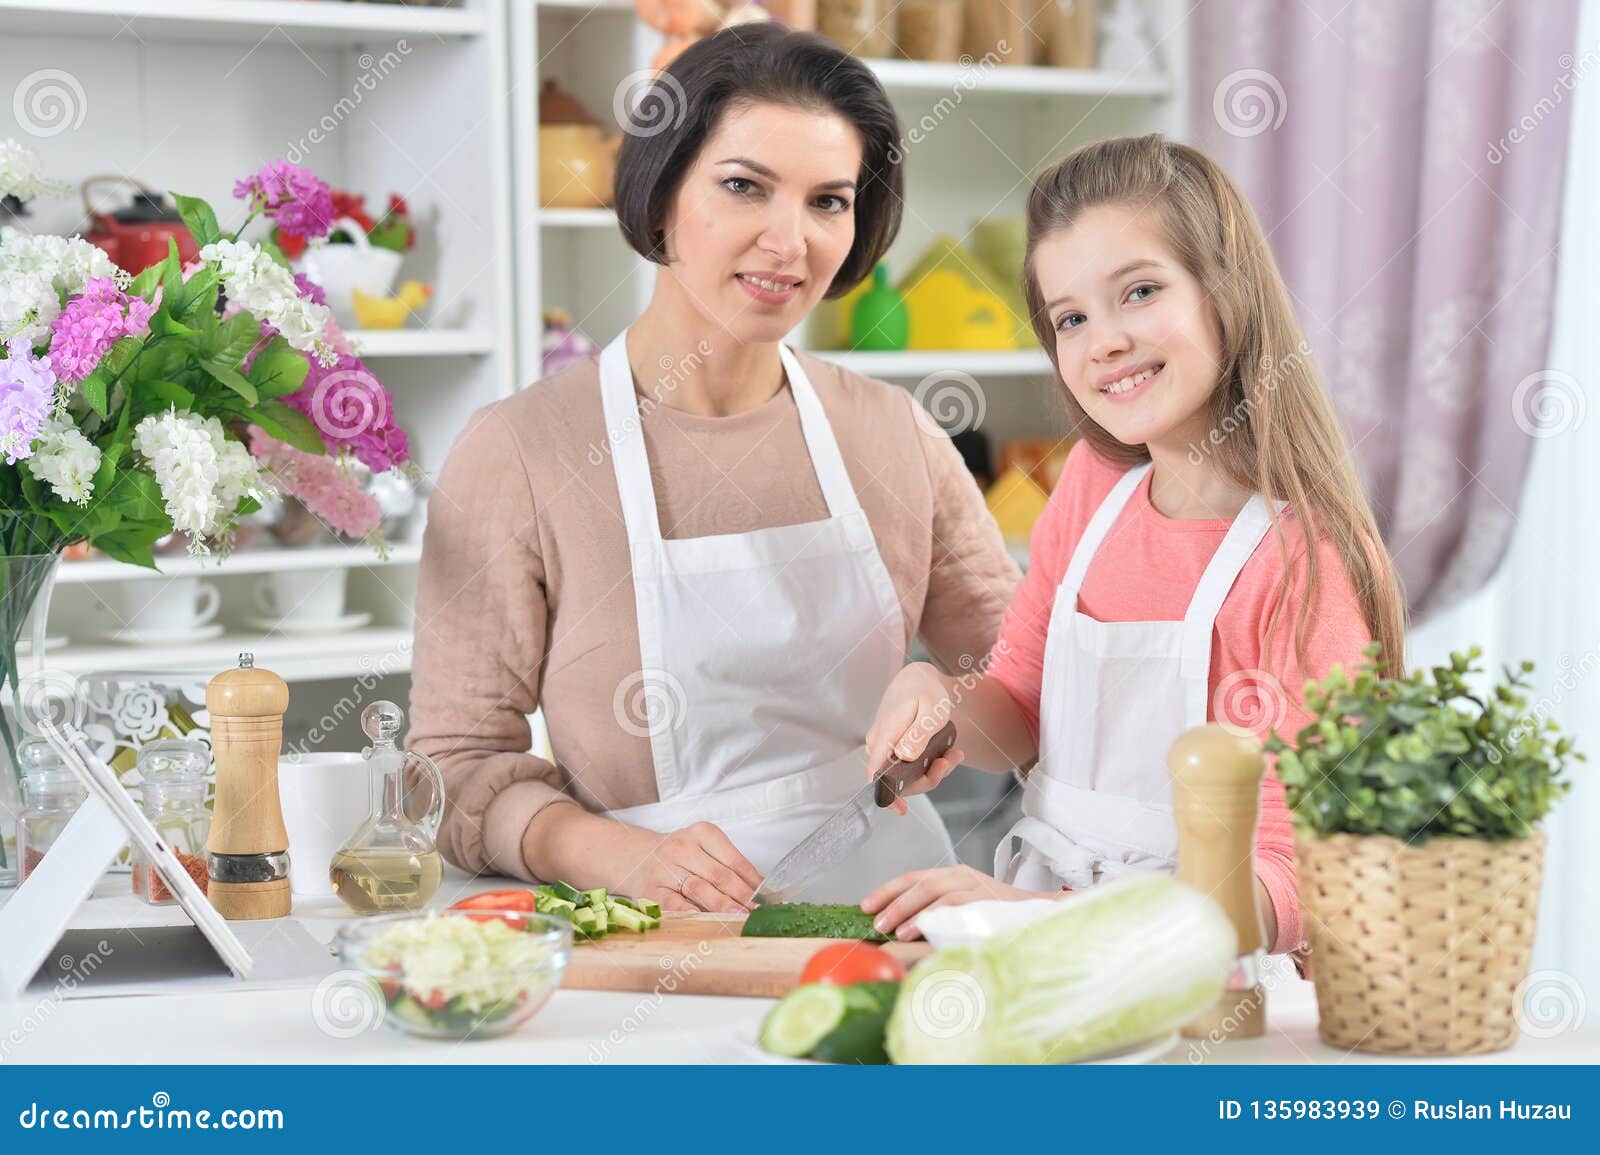 Portrait Of Smiling Mother And Daughter Cooking Together At Kitchen Stock Image Image Of Girl 